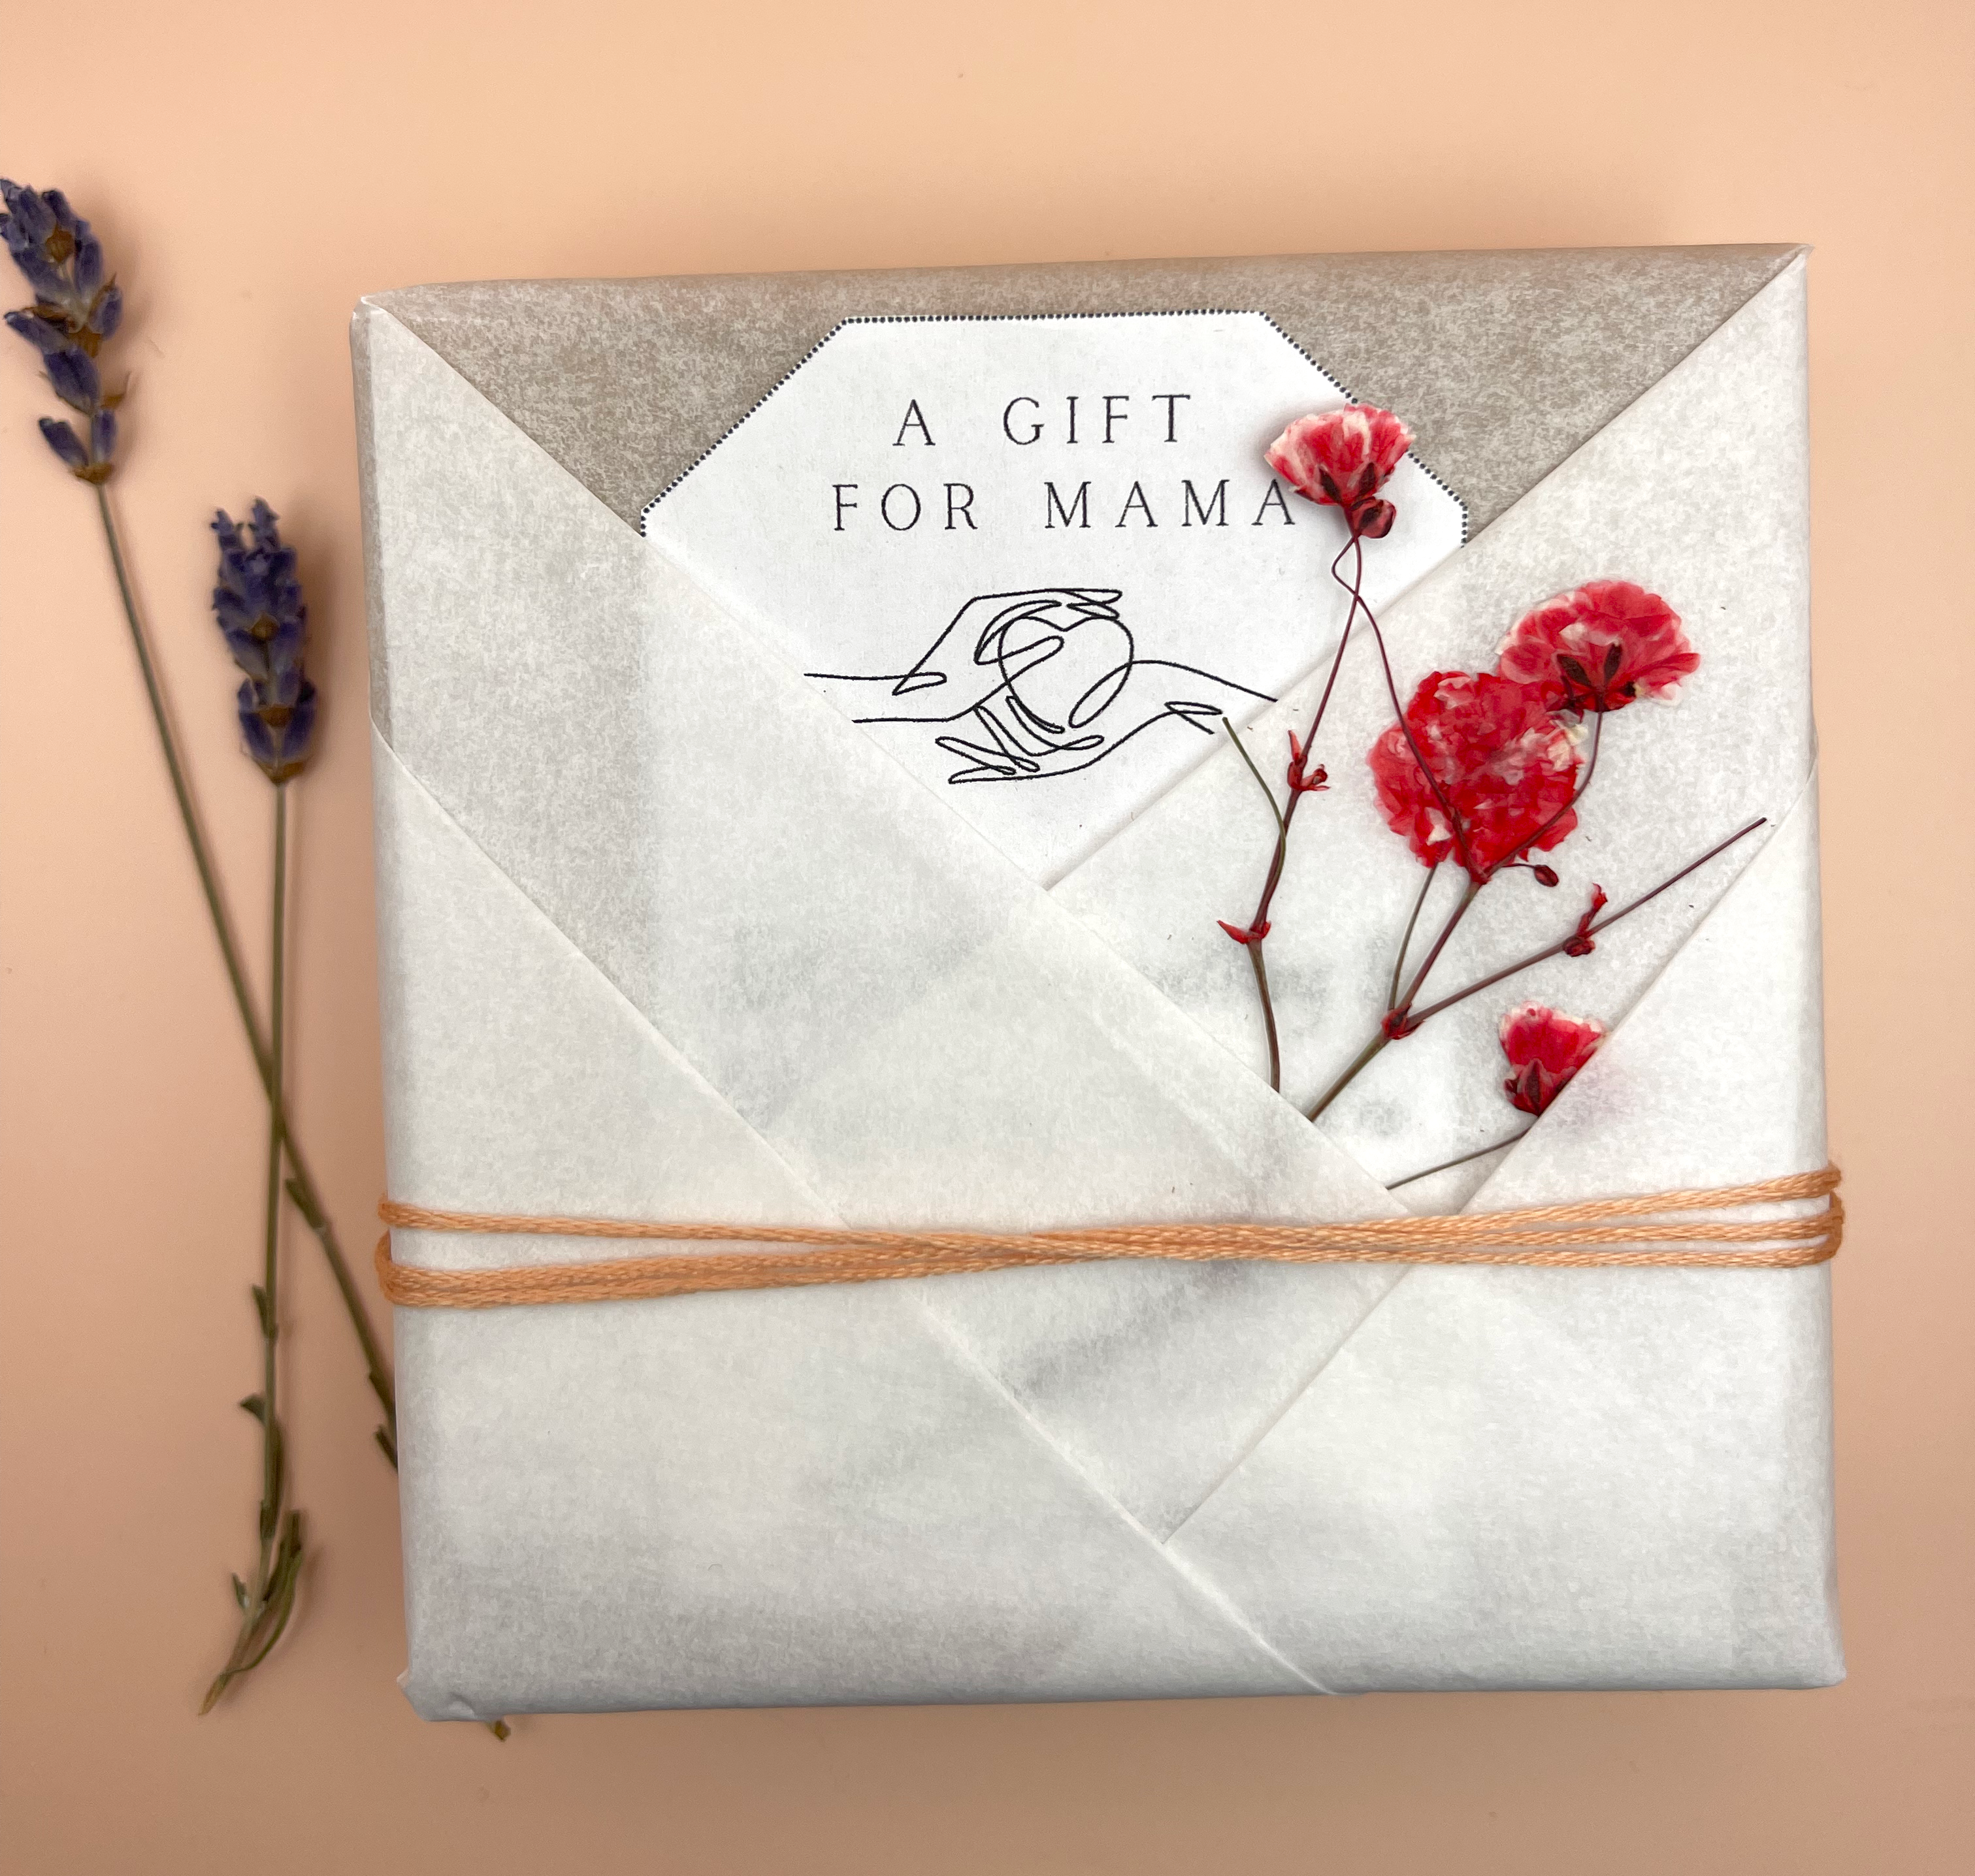 wrapped gift using unique fold technique and dried flowers. shows the option to include a personalized message.  the message card has a line drawn hand giving a hear to another hand.  on top, it reads 'a gift for mama' 